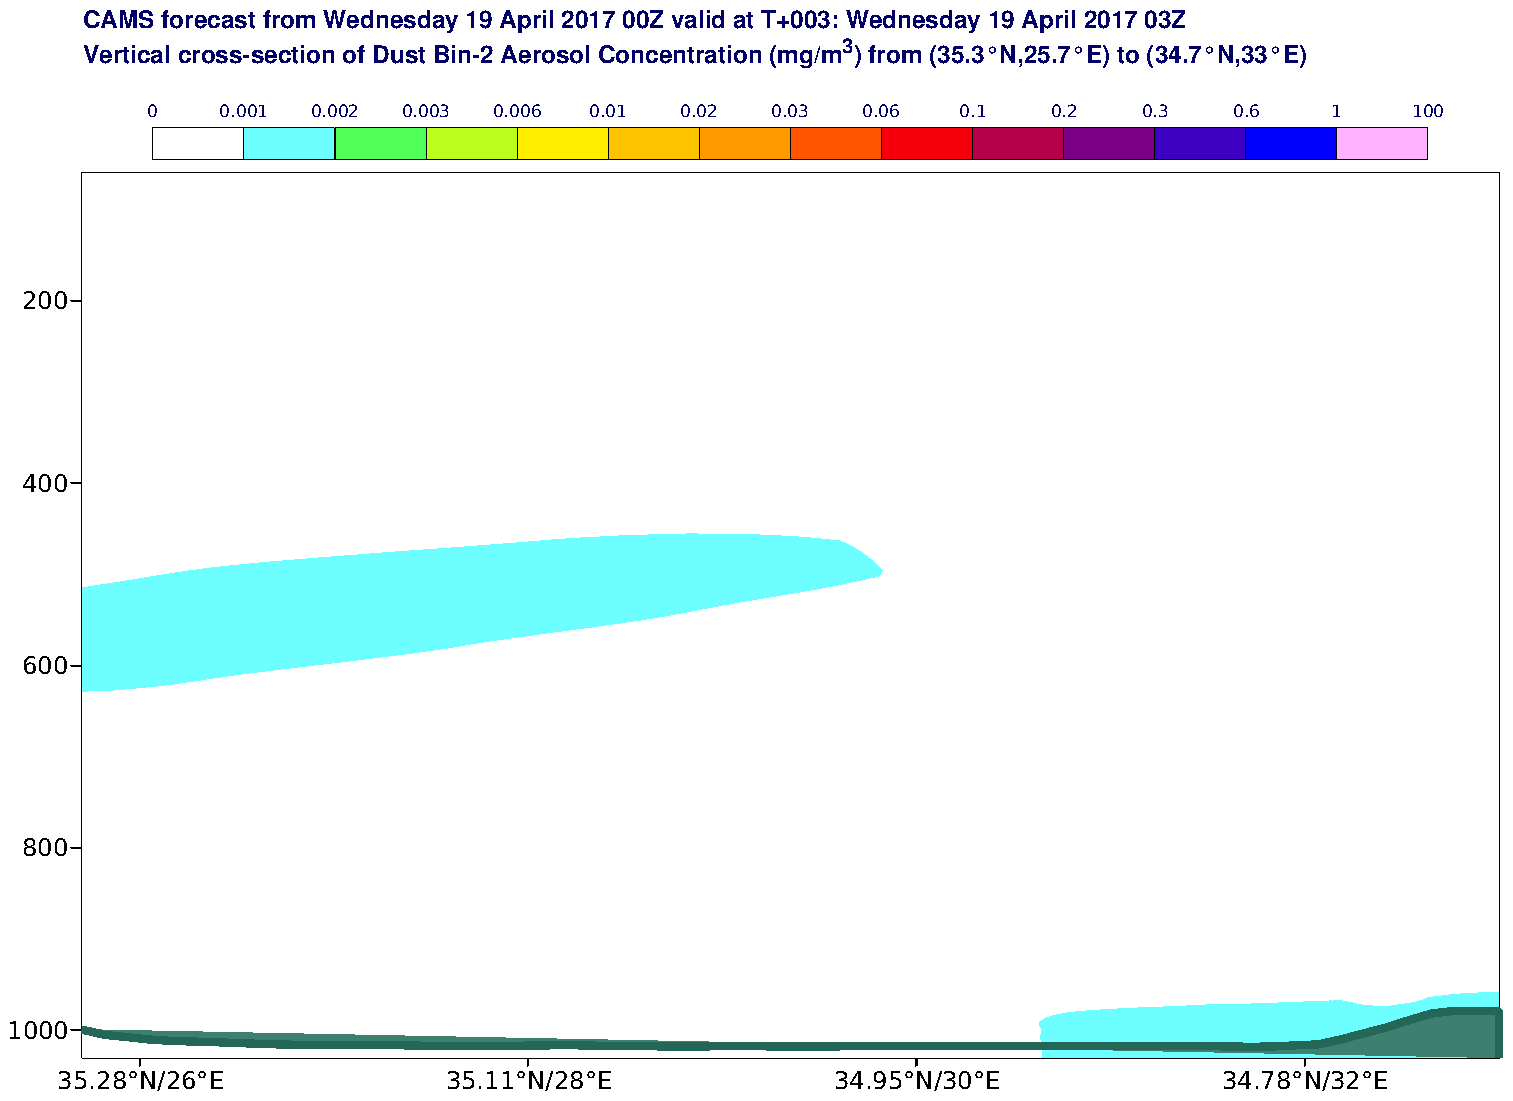 Vertical cross-section of Dust Bin-2 Aerosol Concentration (mg/m3) valid at T3 - 2017-04-19 03:00